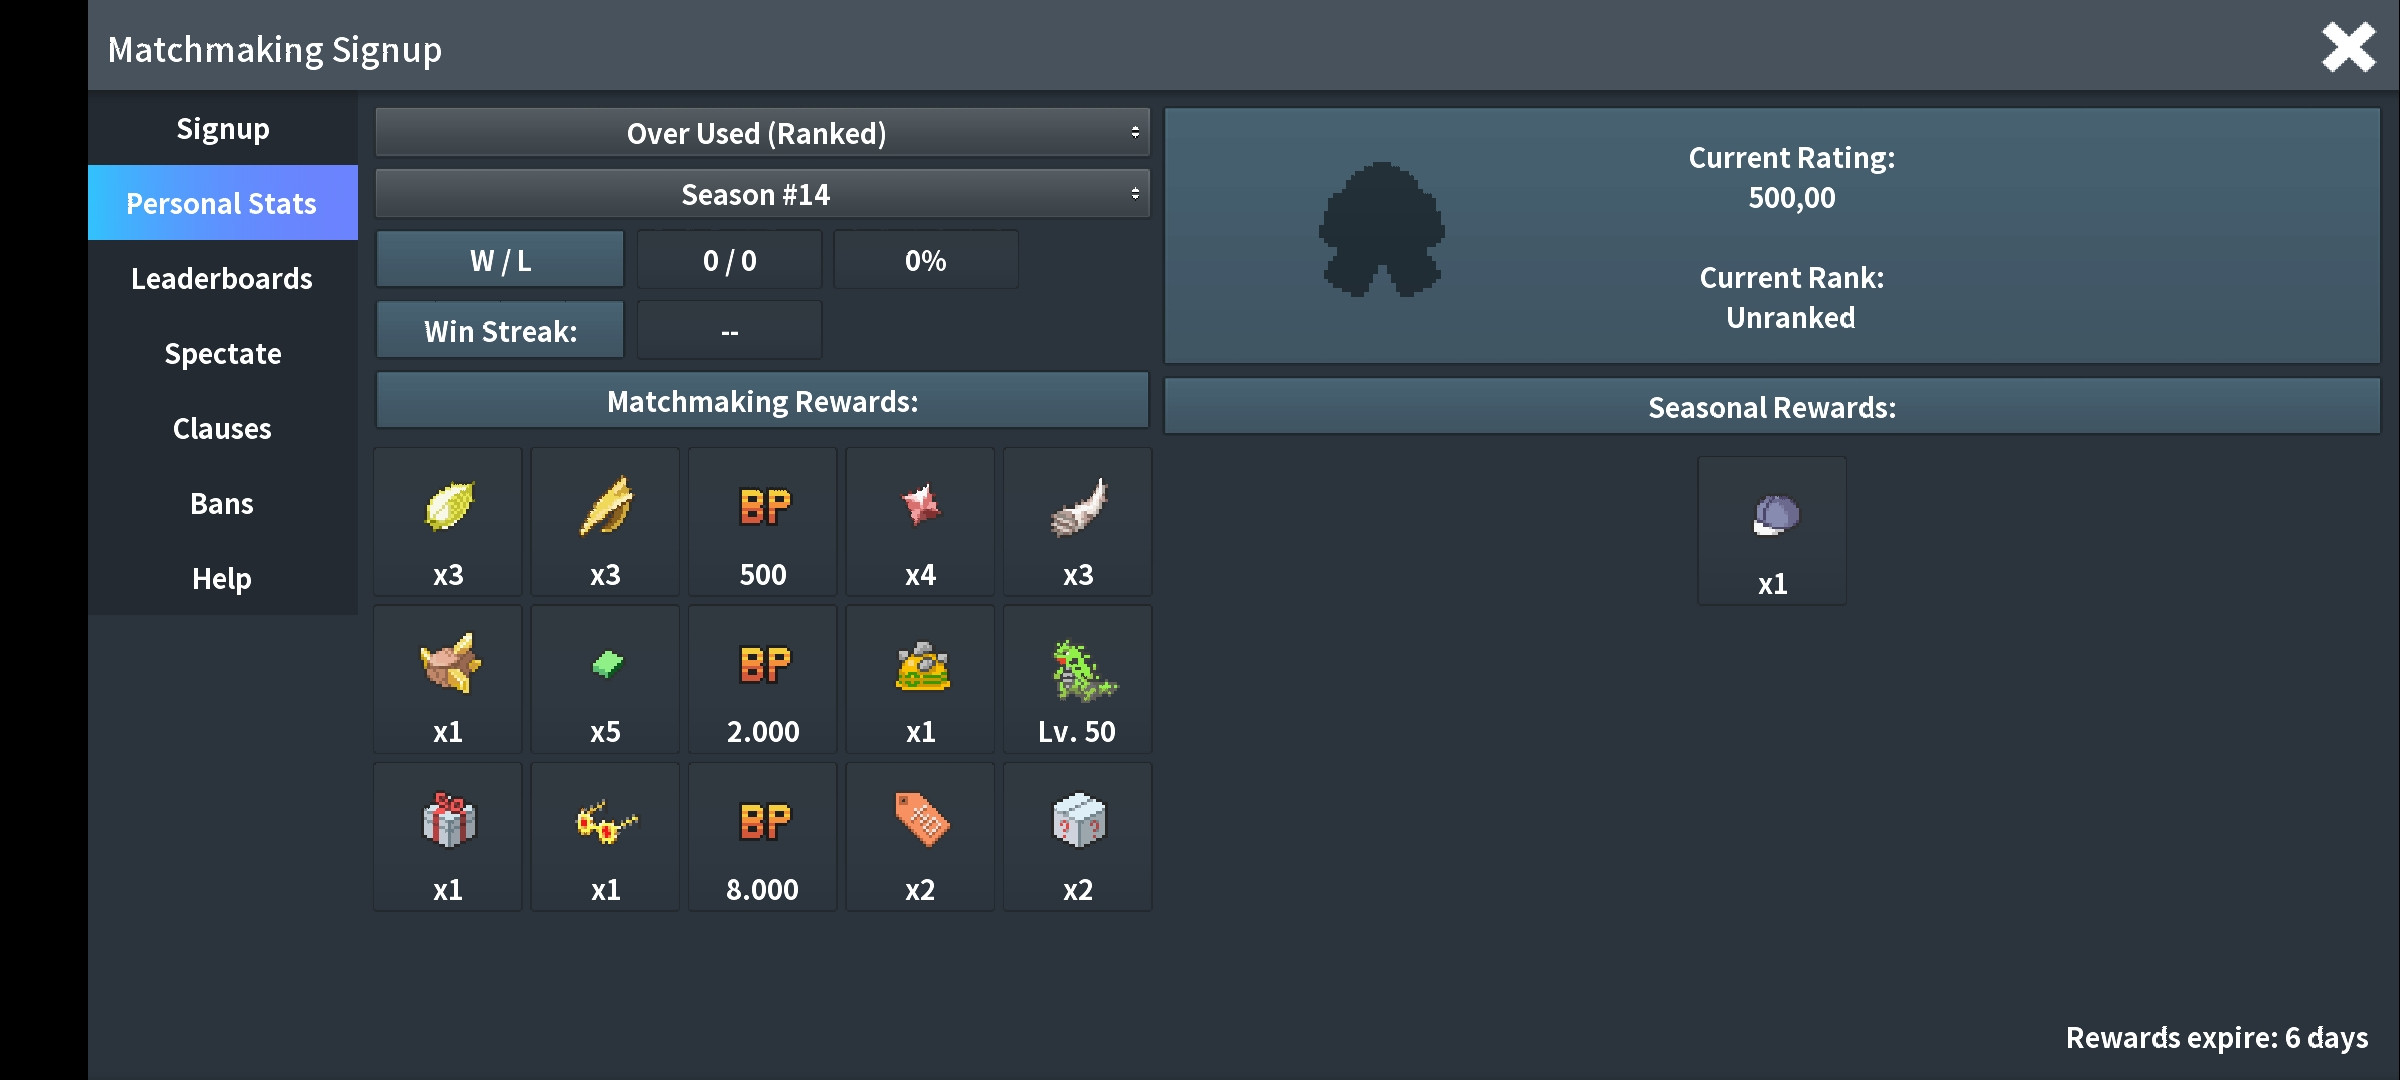 PokeMMO Active Player Count & Population